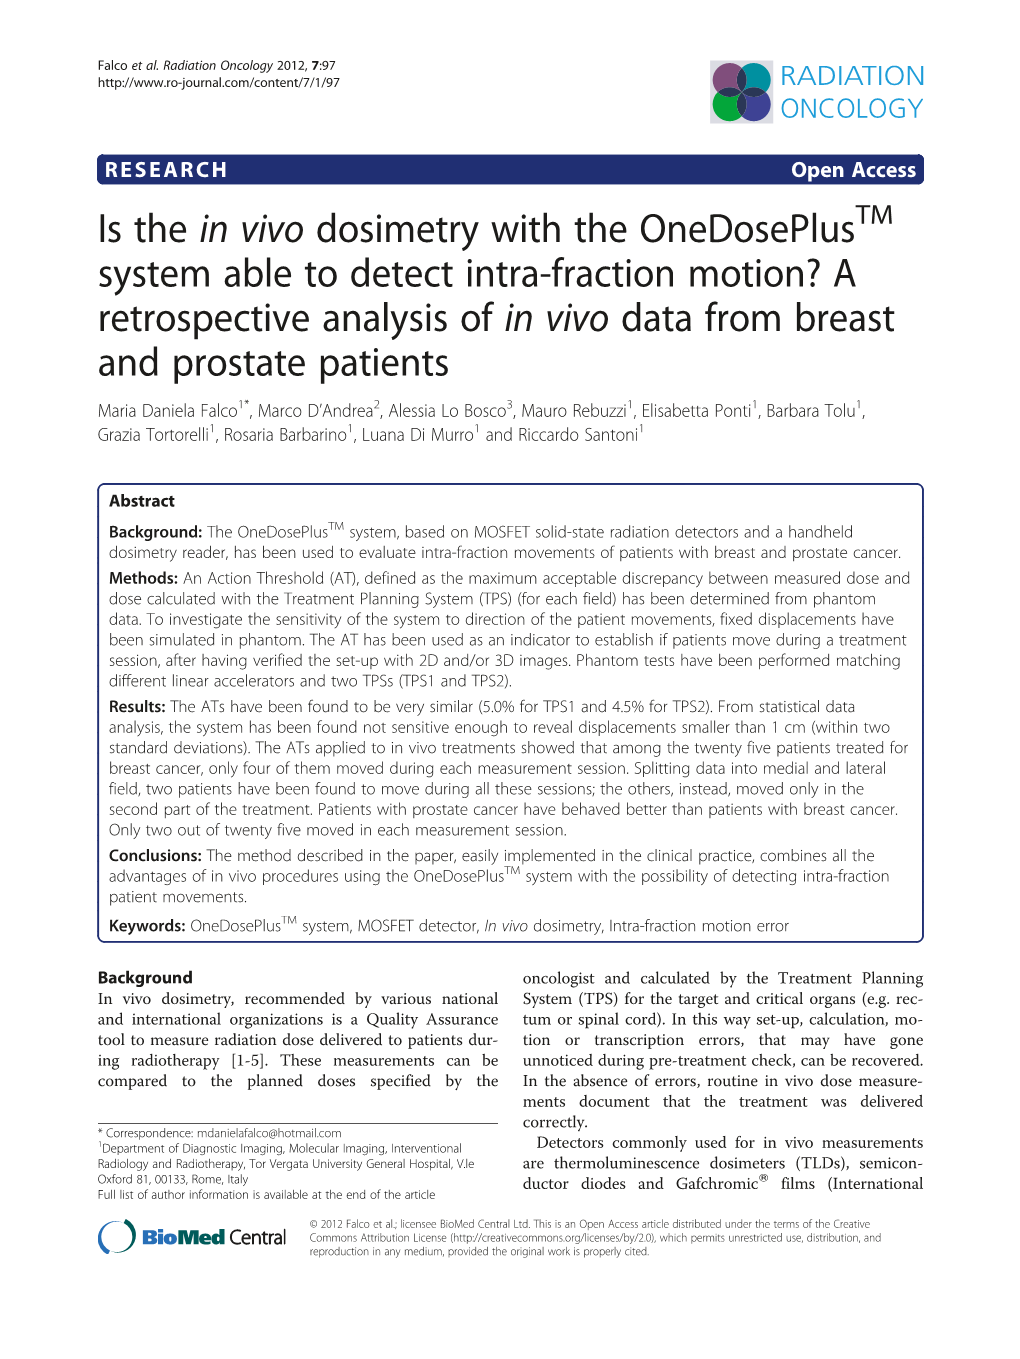 Is the in Vivo Dosimetry with the Onedoseplus